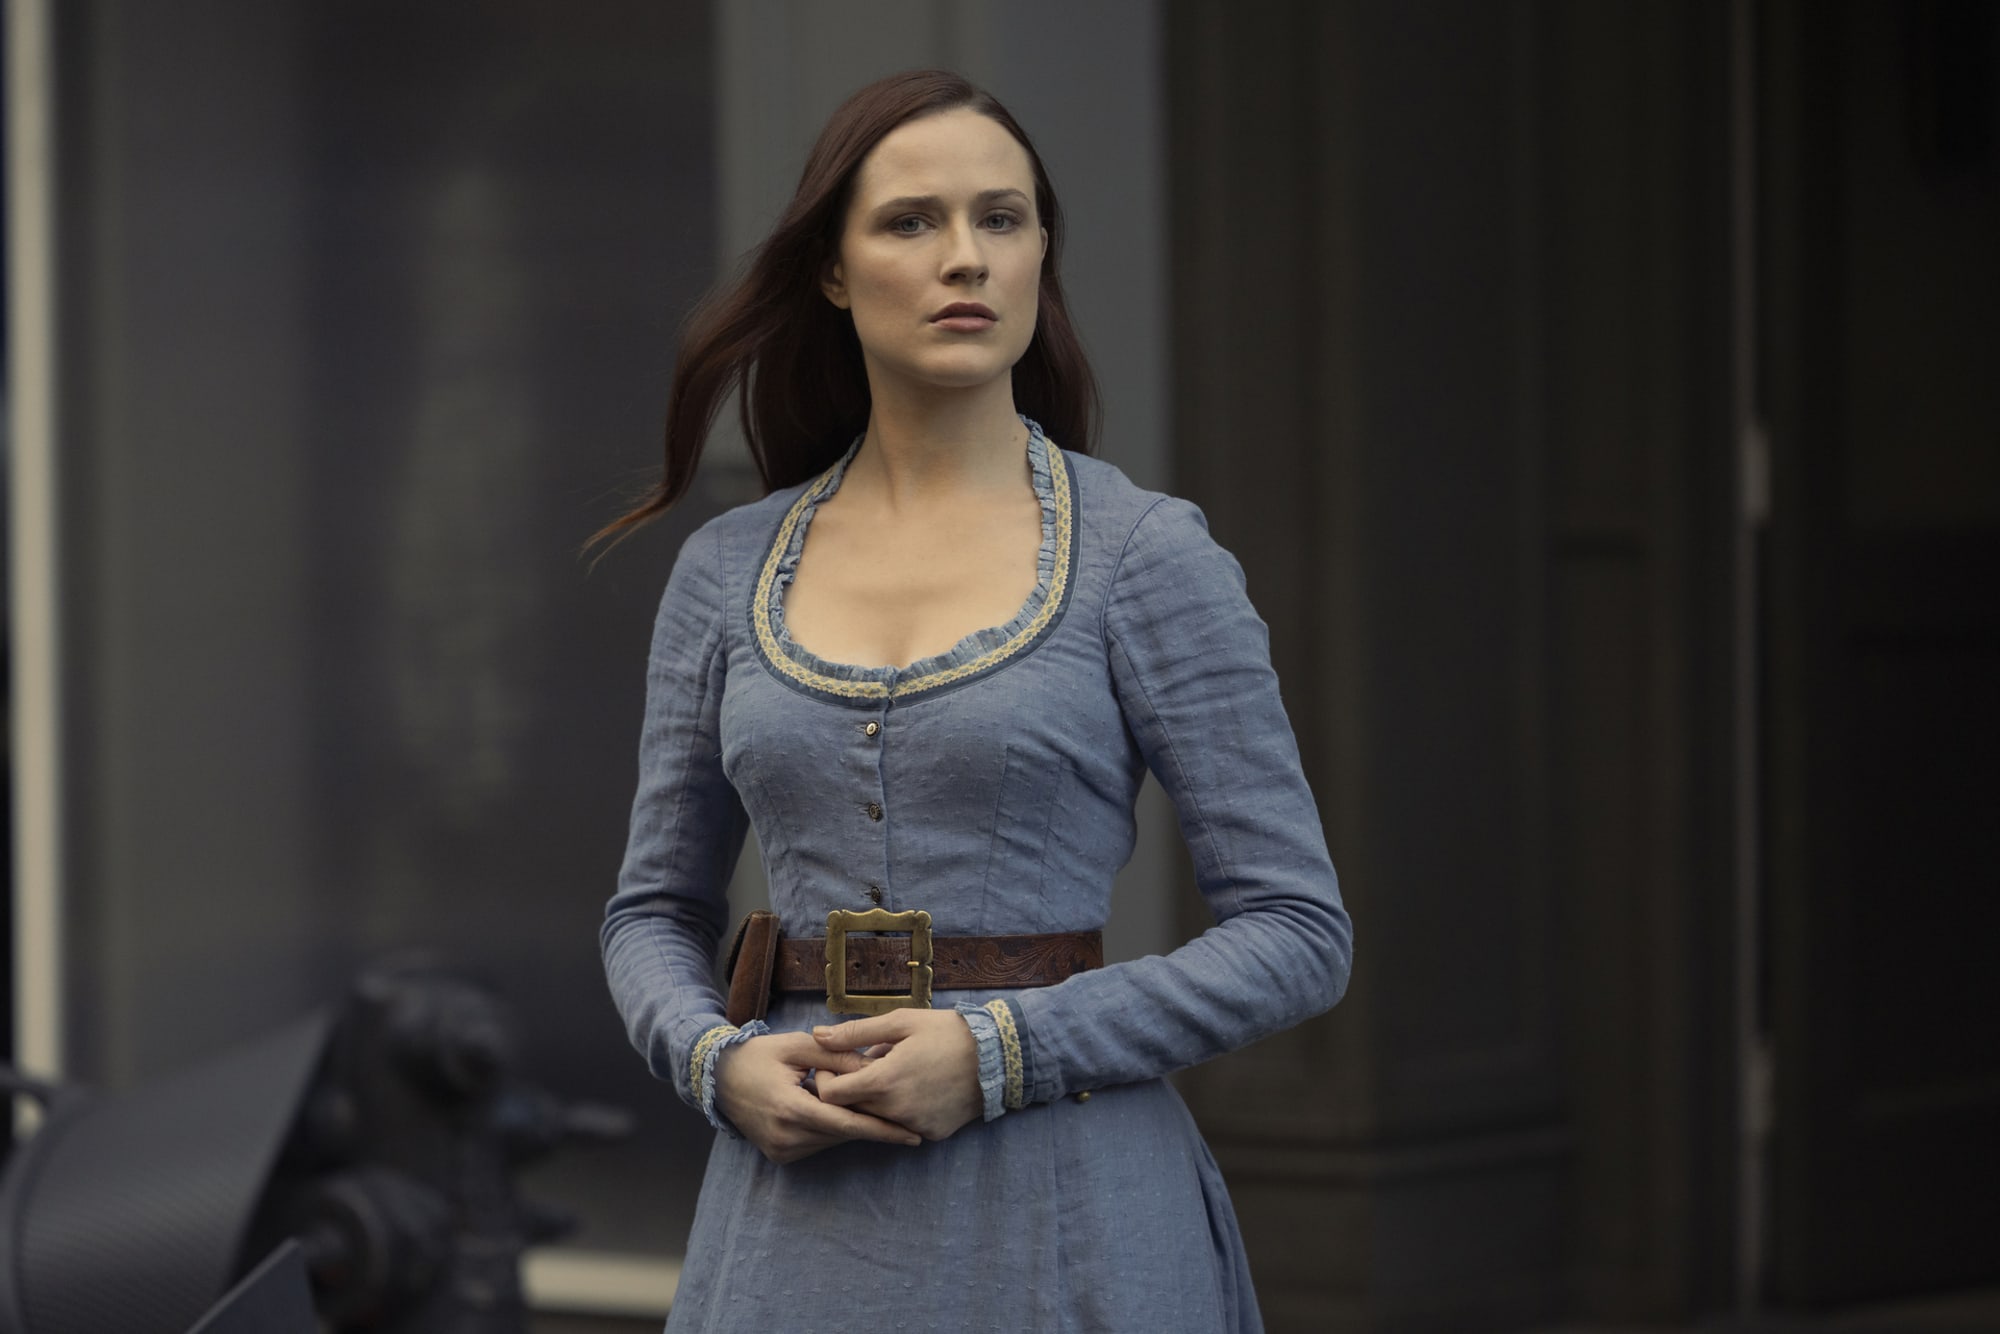 After ChatGPT, Westworld creator thinks her show looks “like a documentary”